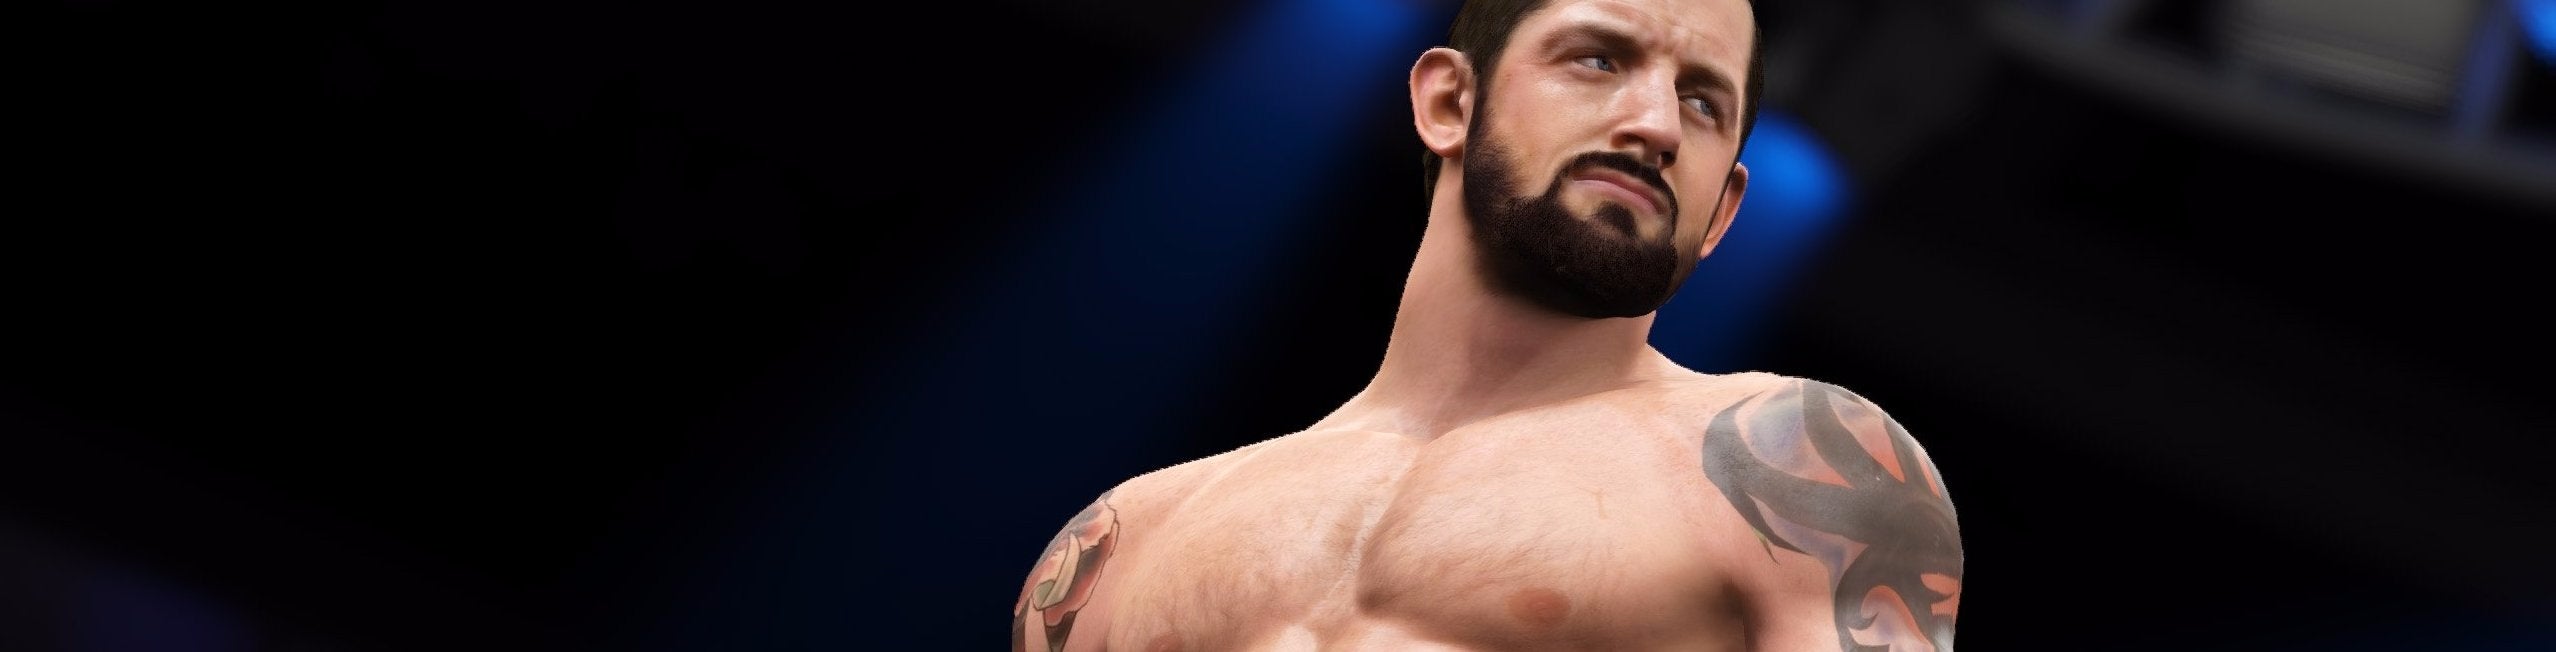 Image for WWE 2K16 review